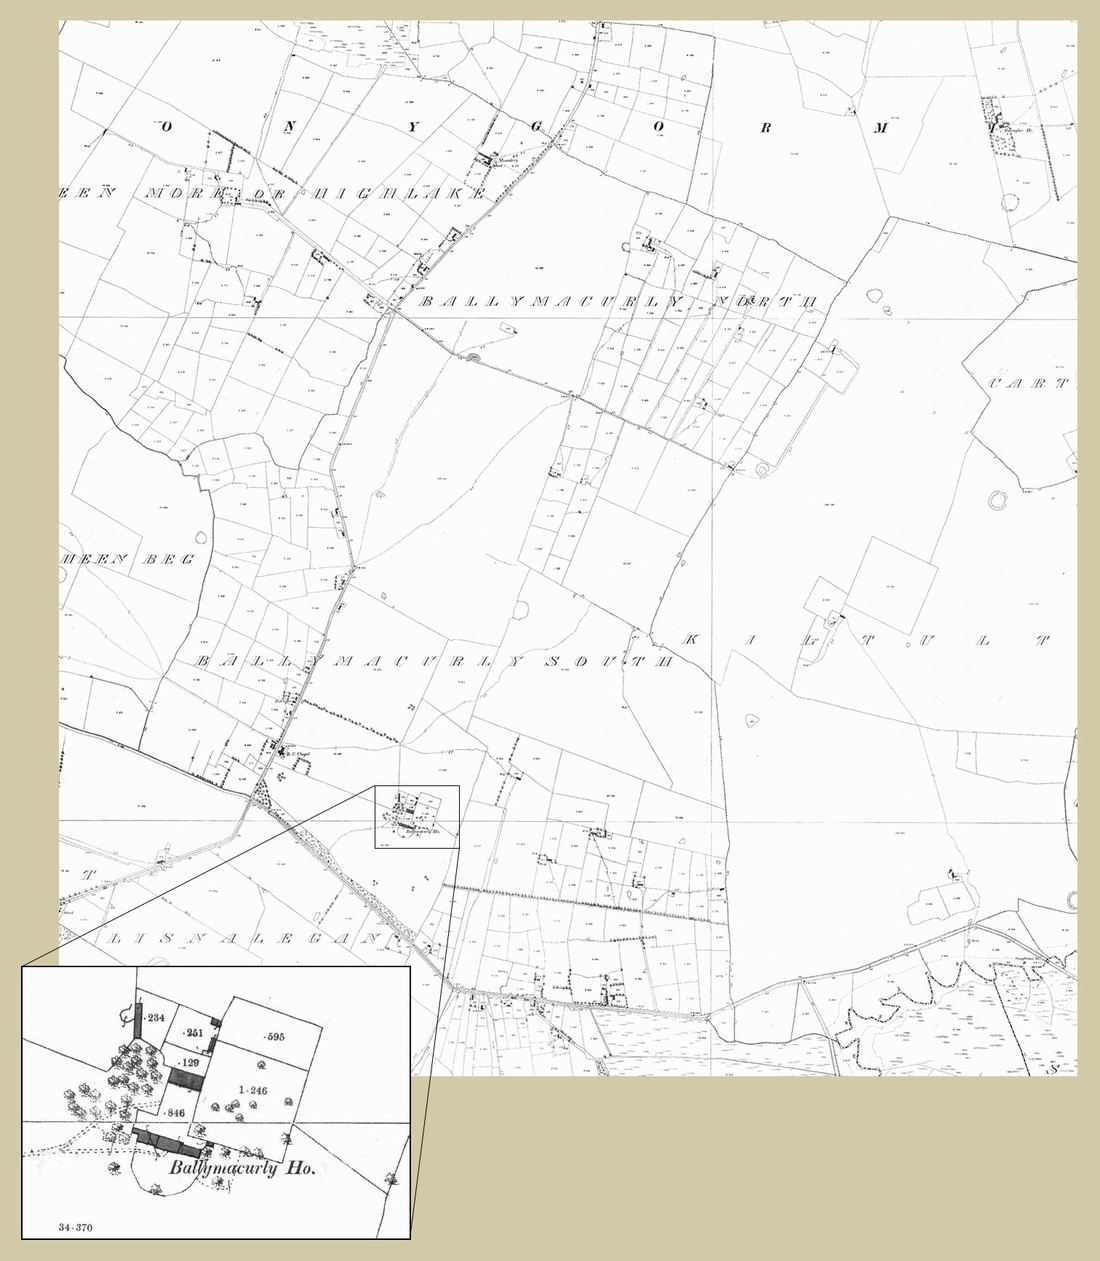 Ballymacurly Ordnance Survey, Curley home